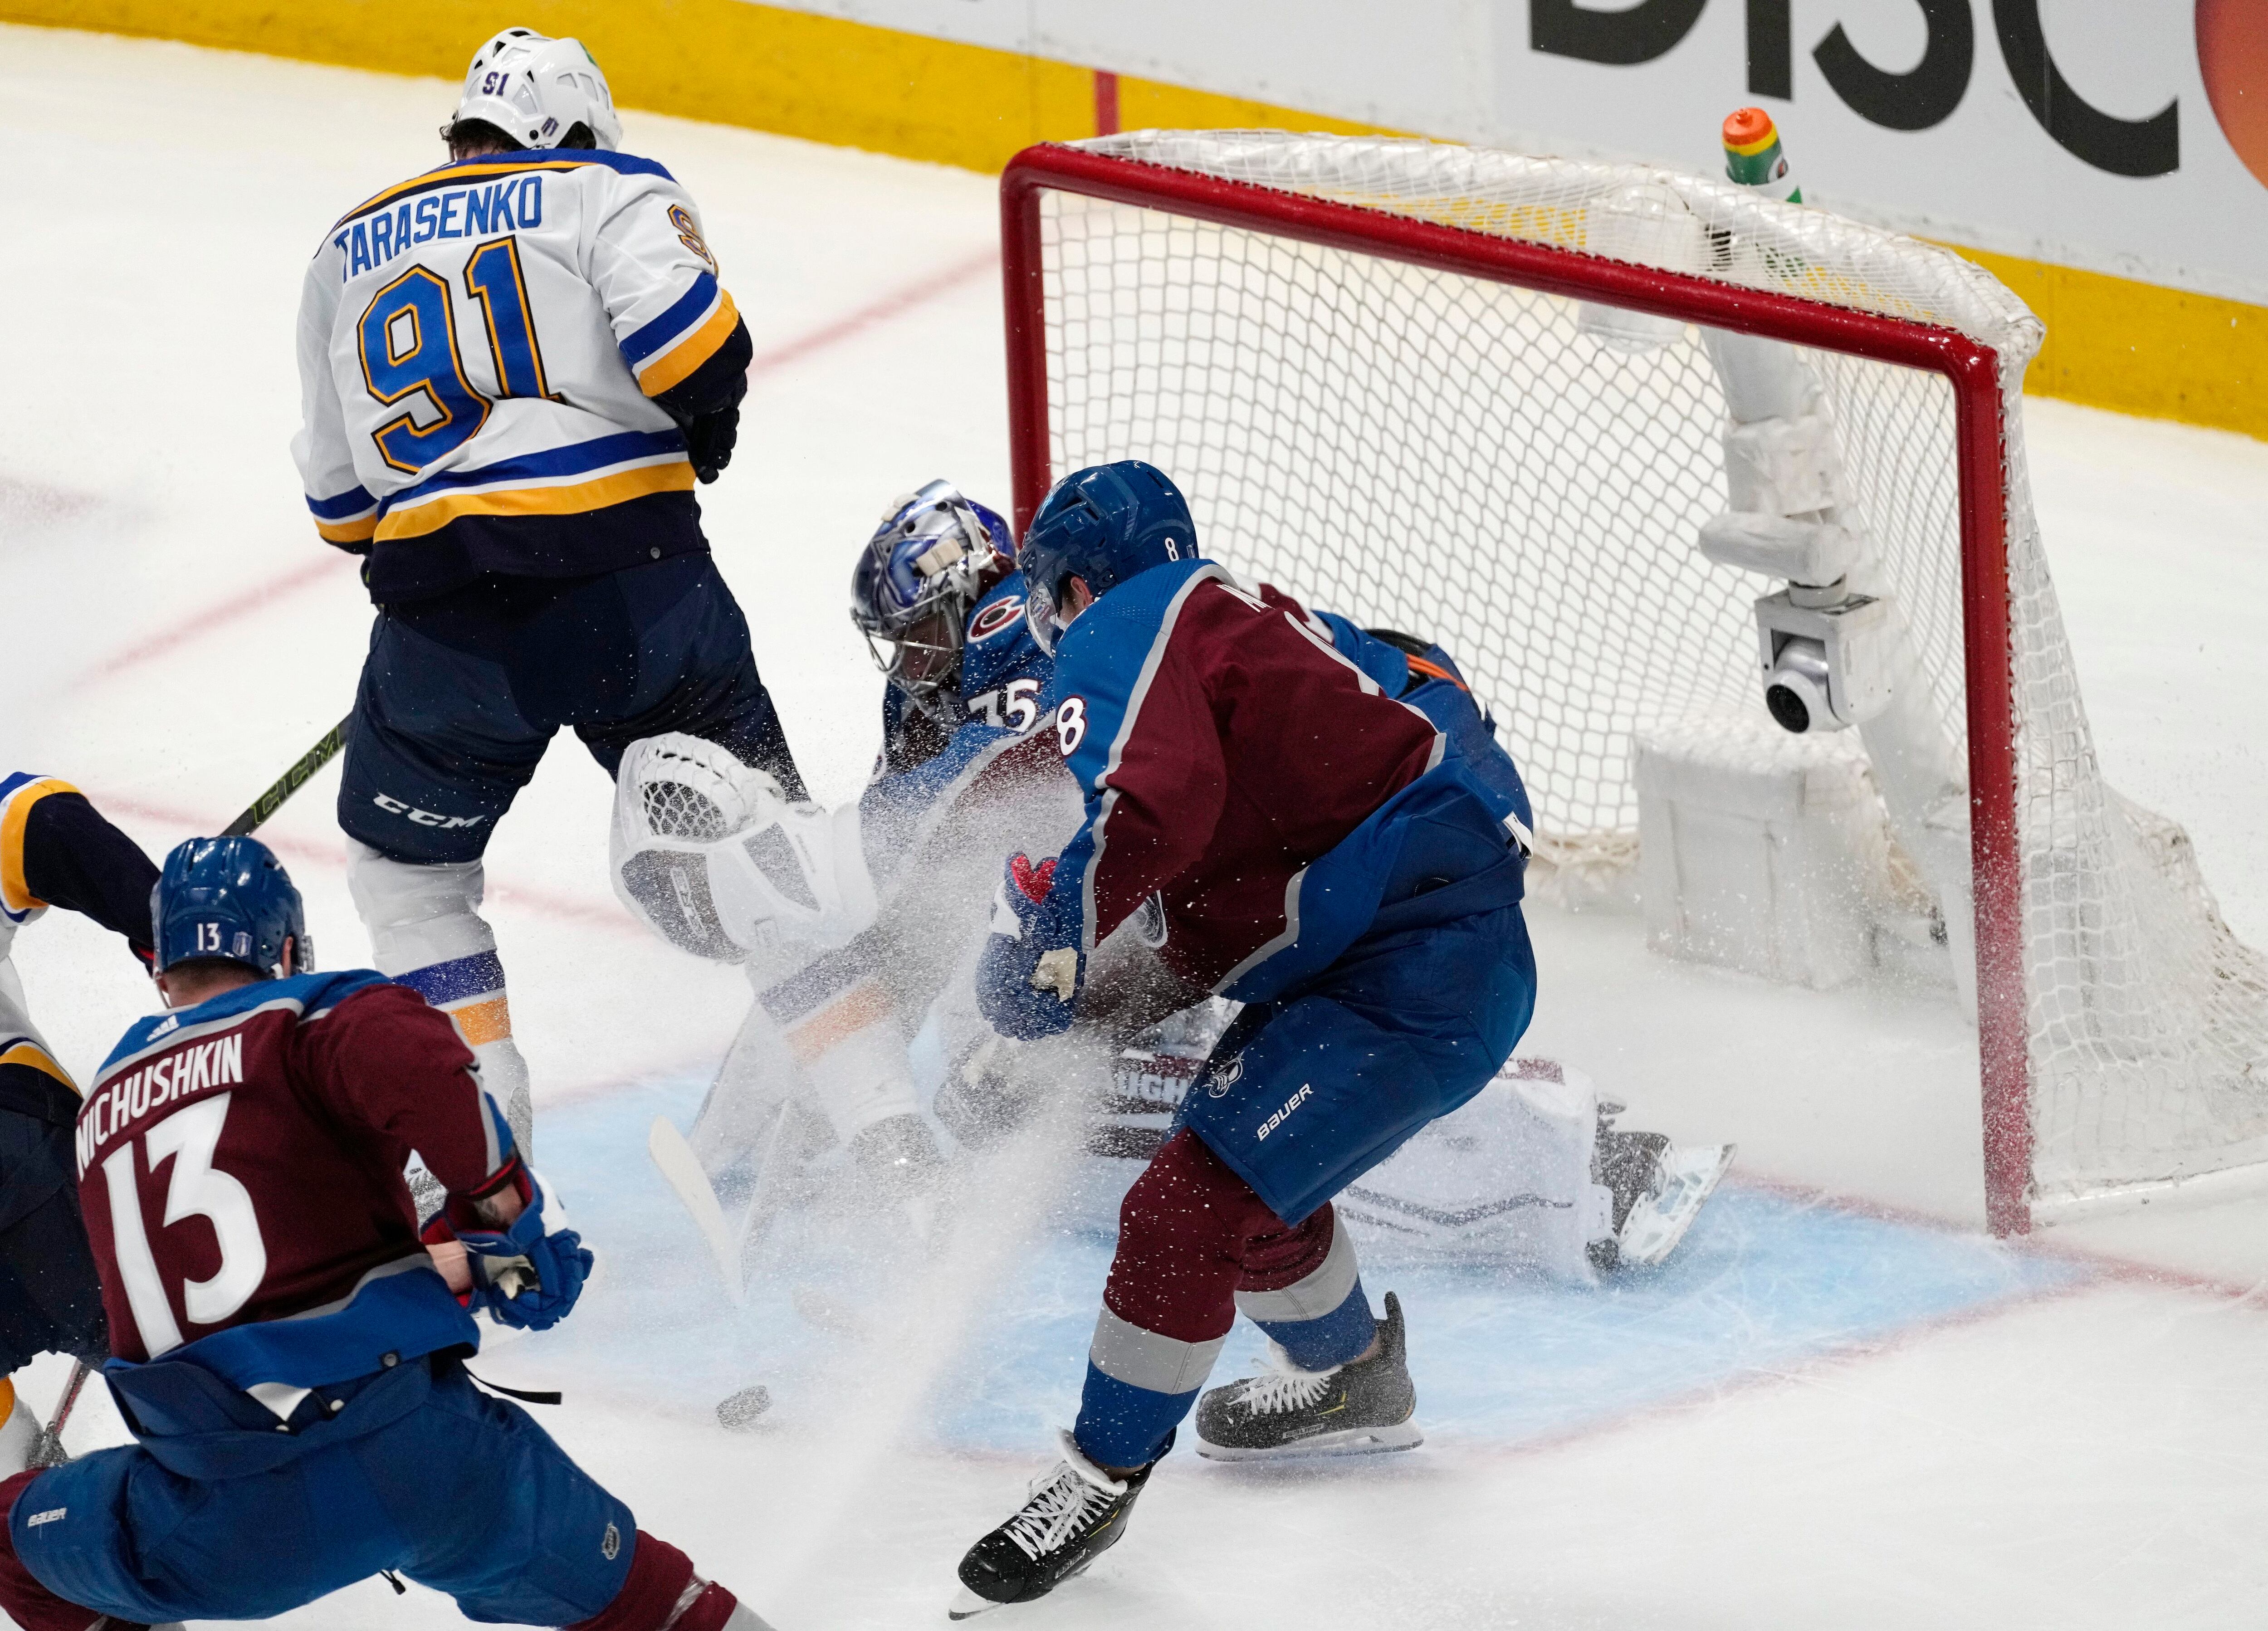 Nathan MacKinnon capped off hat trick for Avs with sensational goal